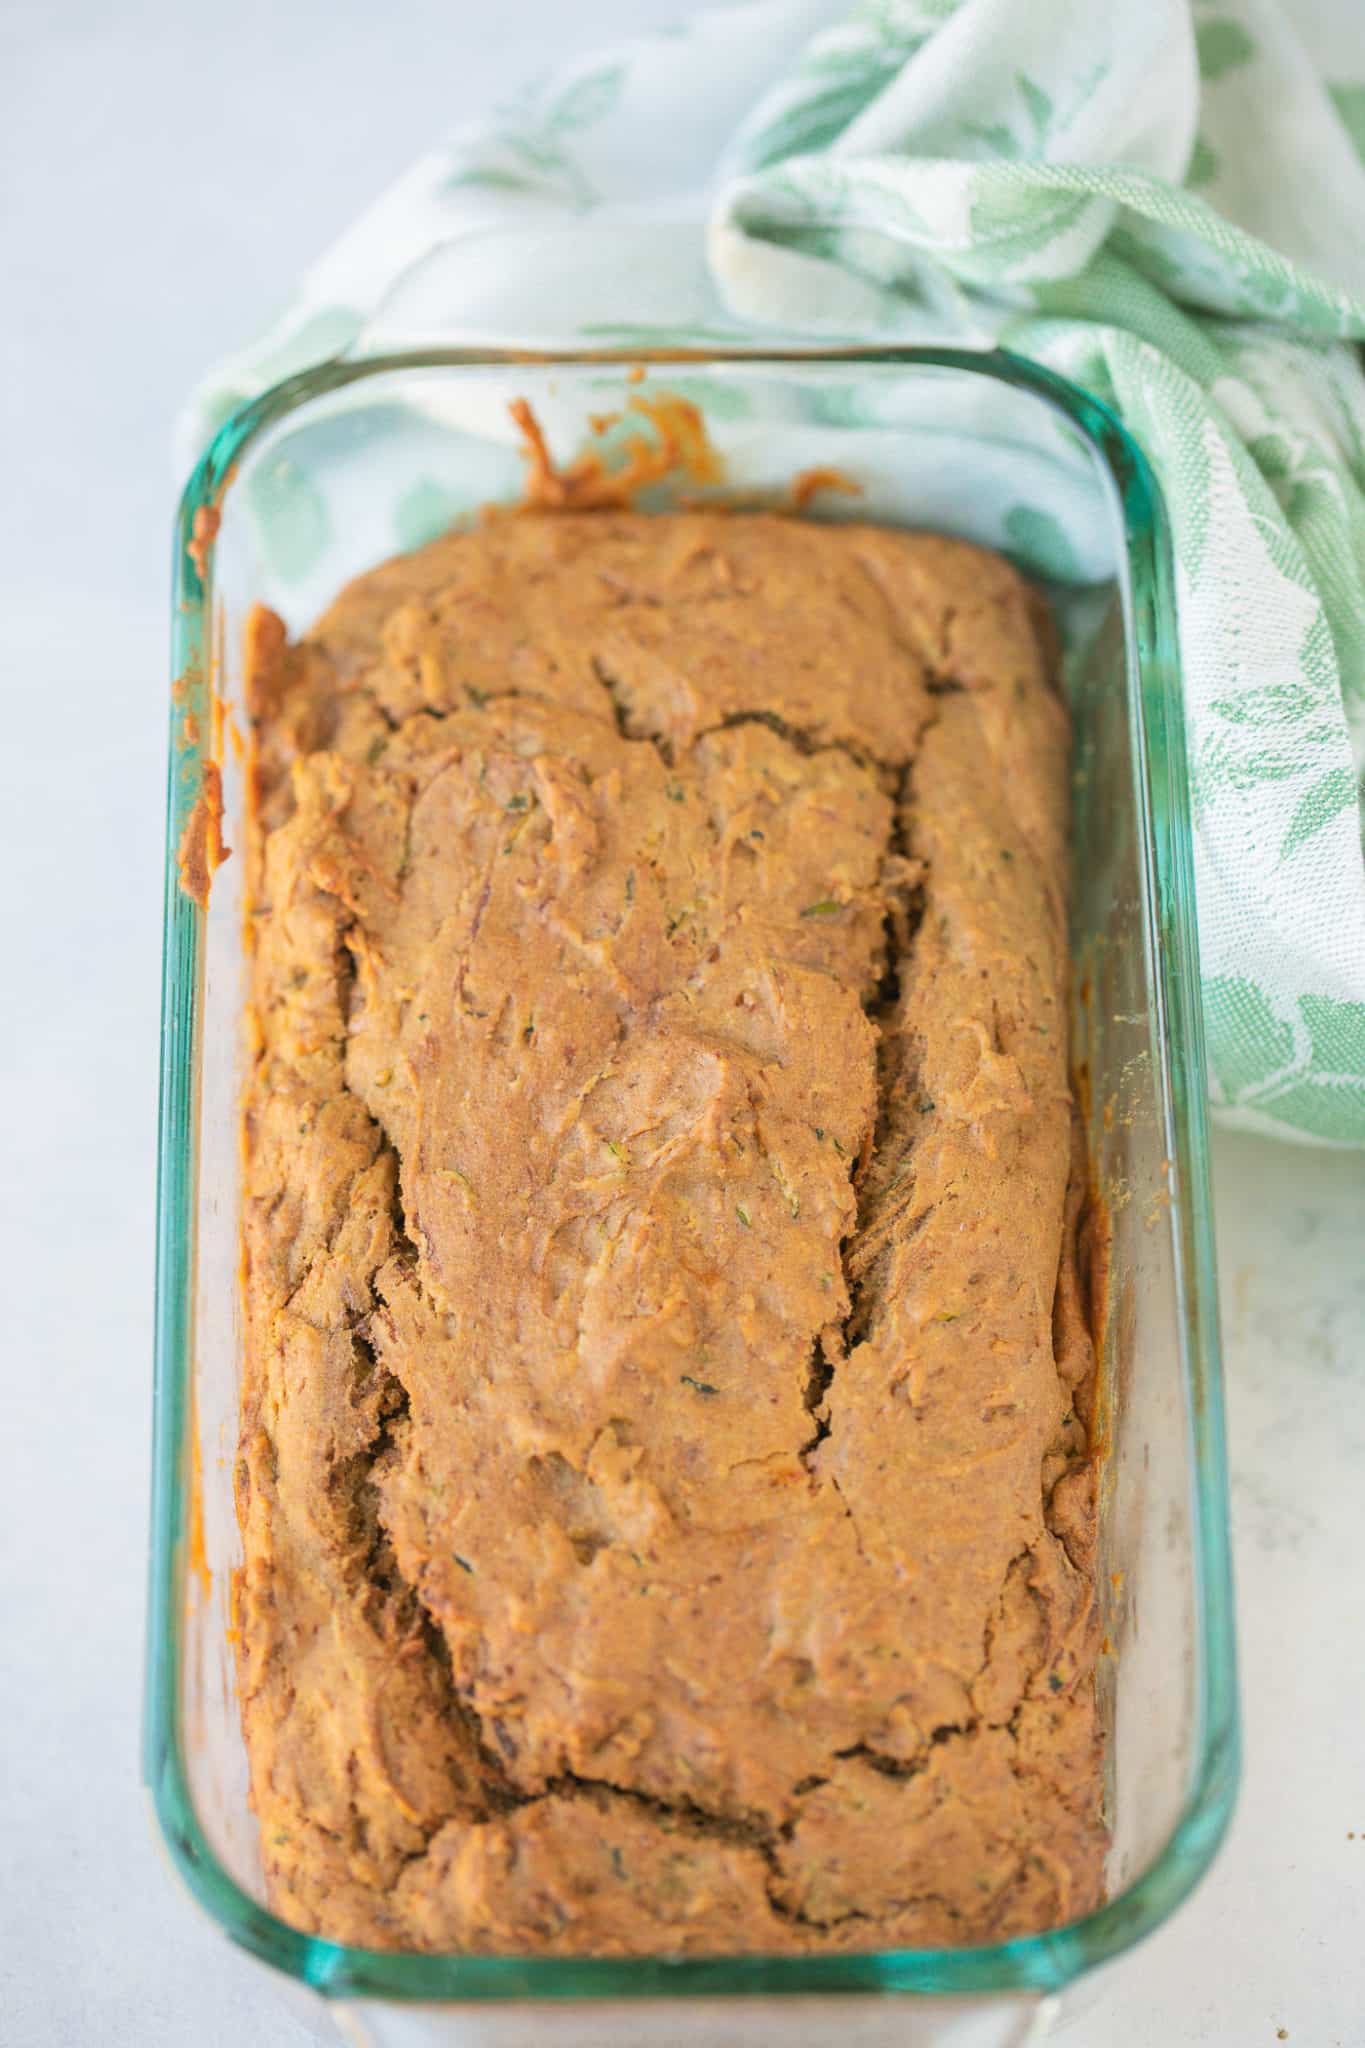 baked zucchini bread cooling in glass baking dish